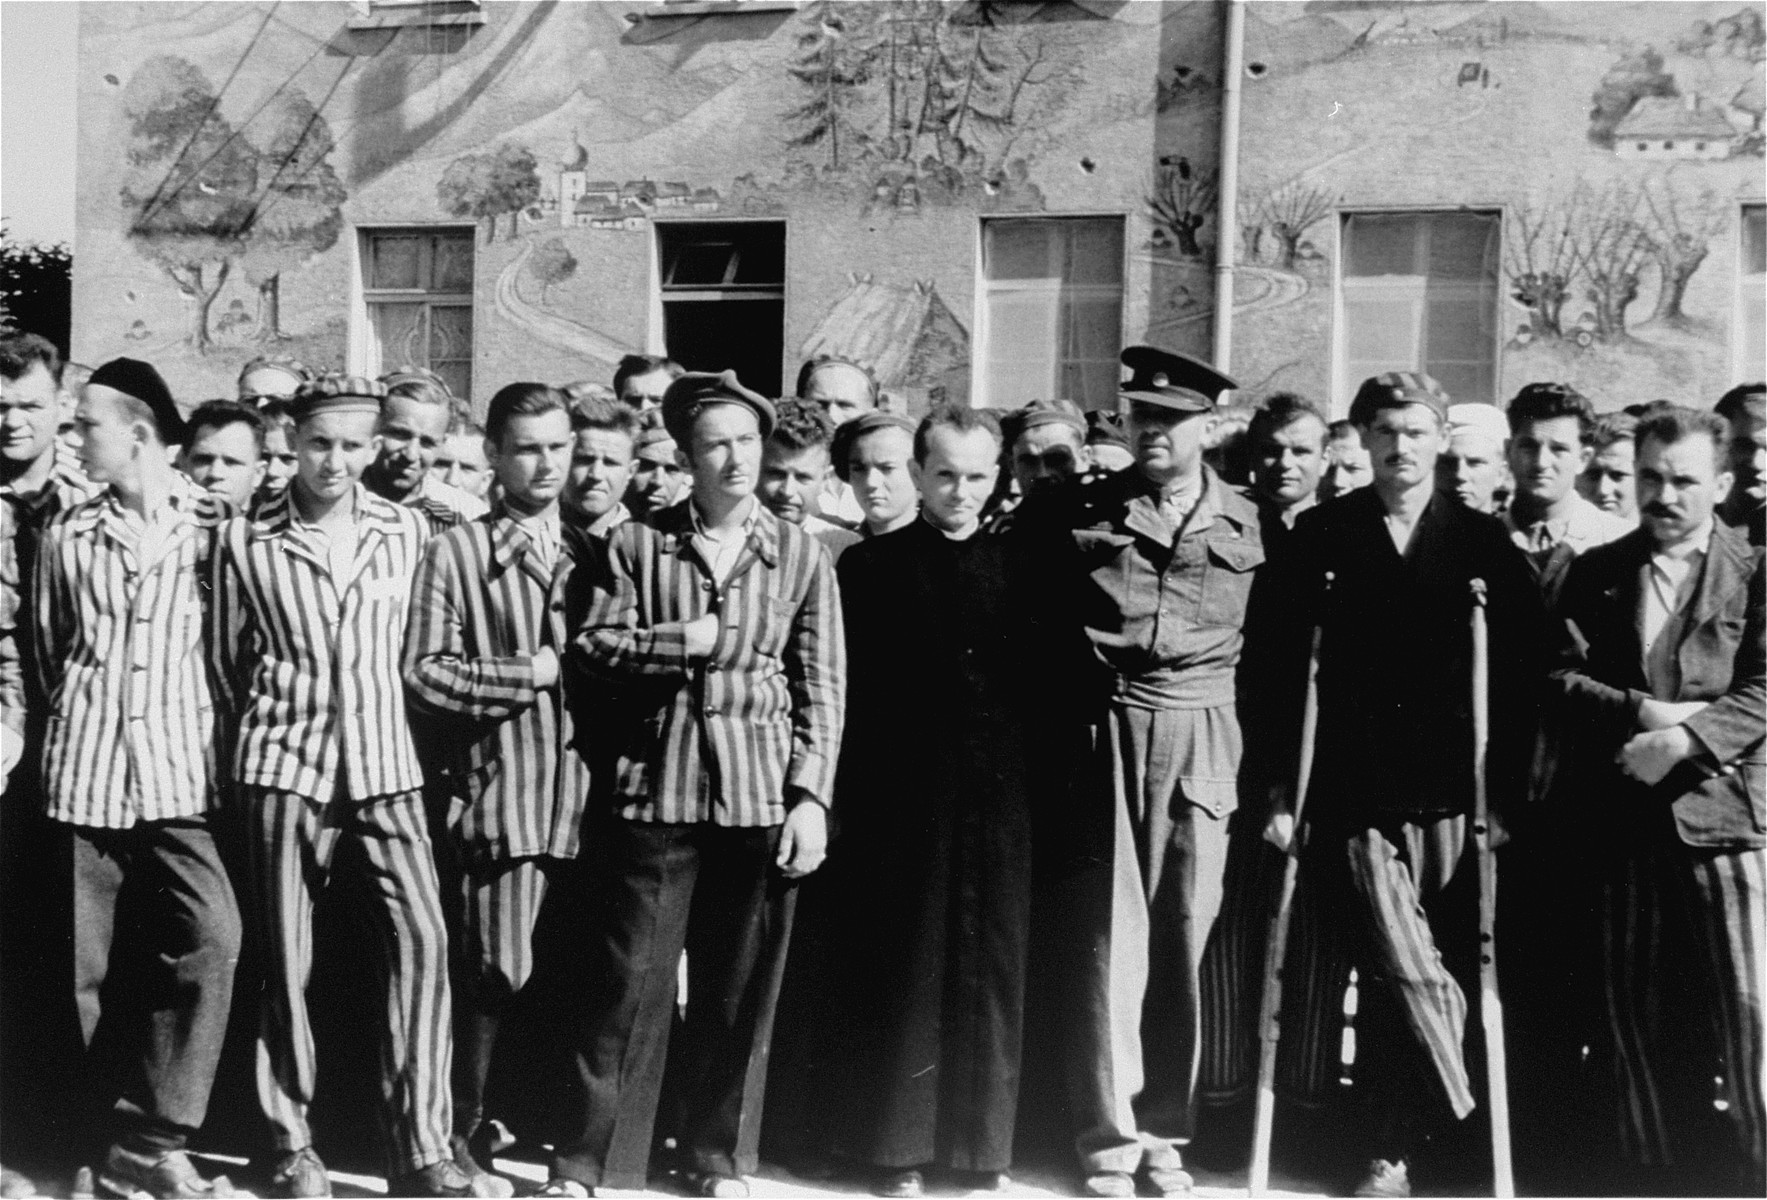 Major Edminson of UNRRA in Dachau with survivors his agency is aiding.  The priest next to him is a Pole and is one of the 150 survivors of 2500 Polish Roman Catholic priests who were incarcerated in Dachau.